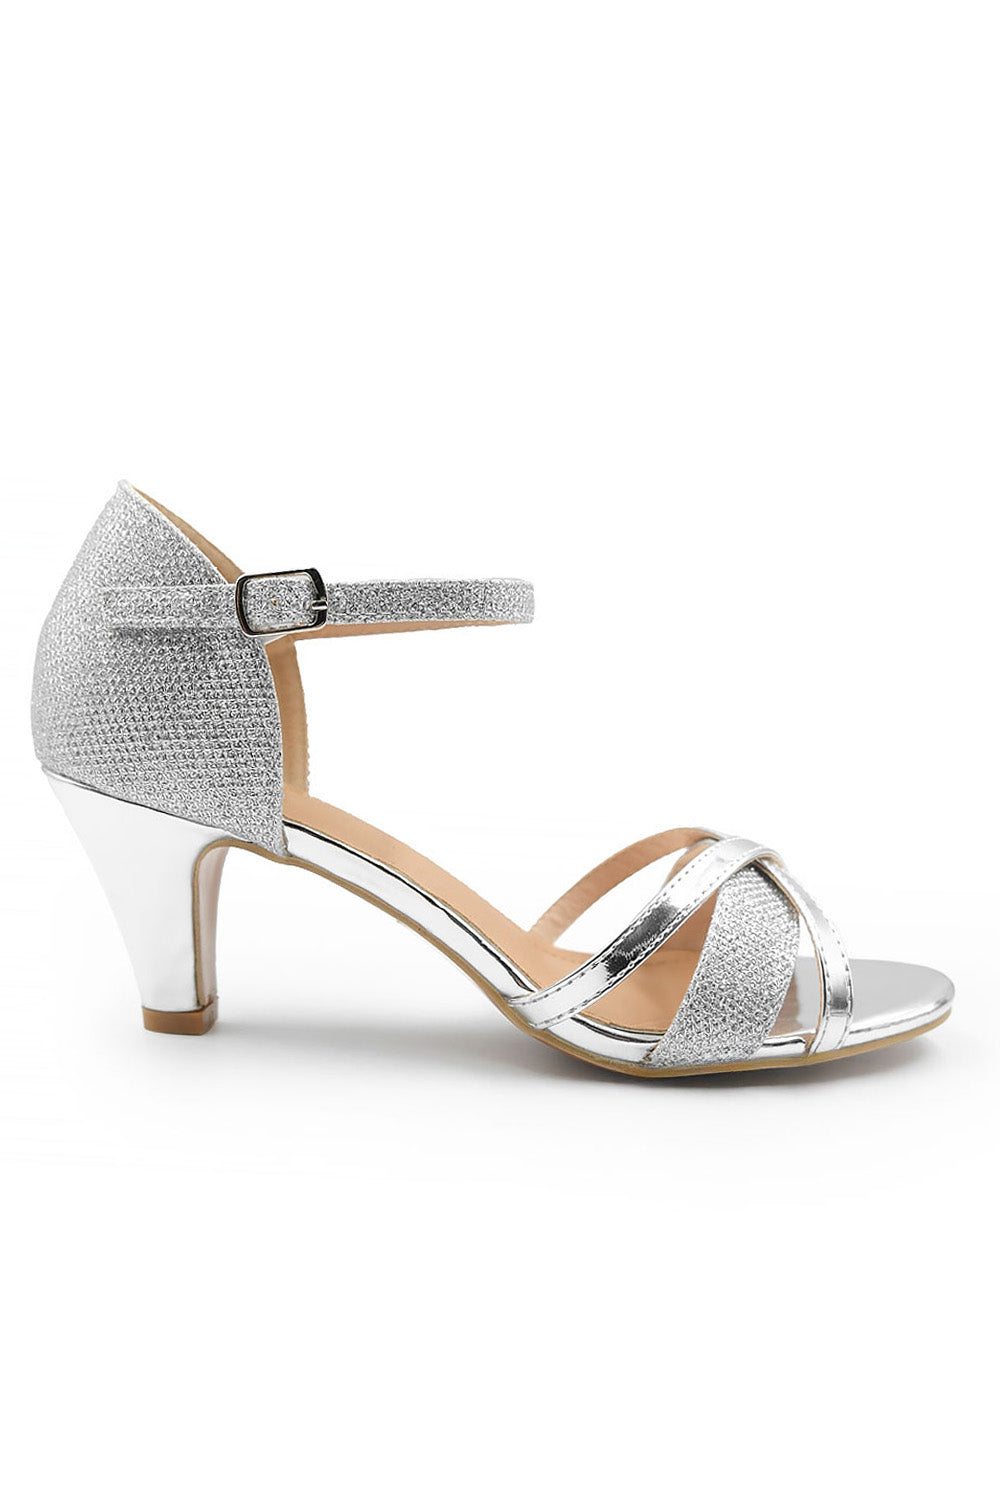 ARTEMIS MID HIGH HEEL WITH BUCKLE ANKLE STRAP IN MOON SILVER GLITTER